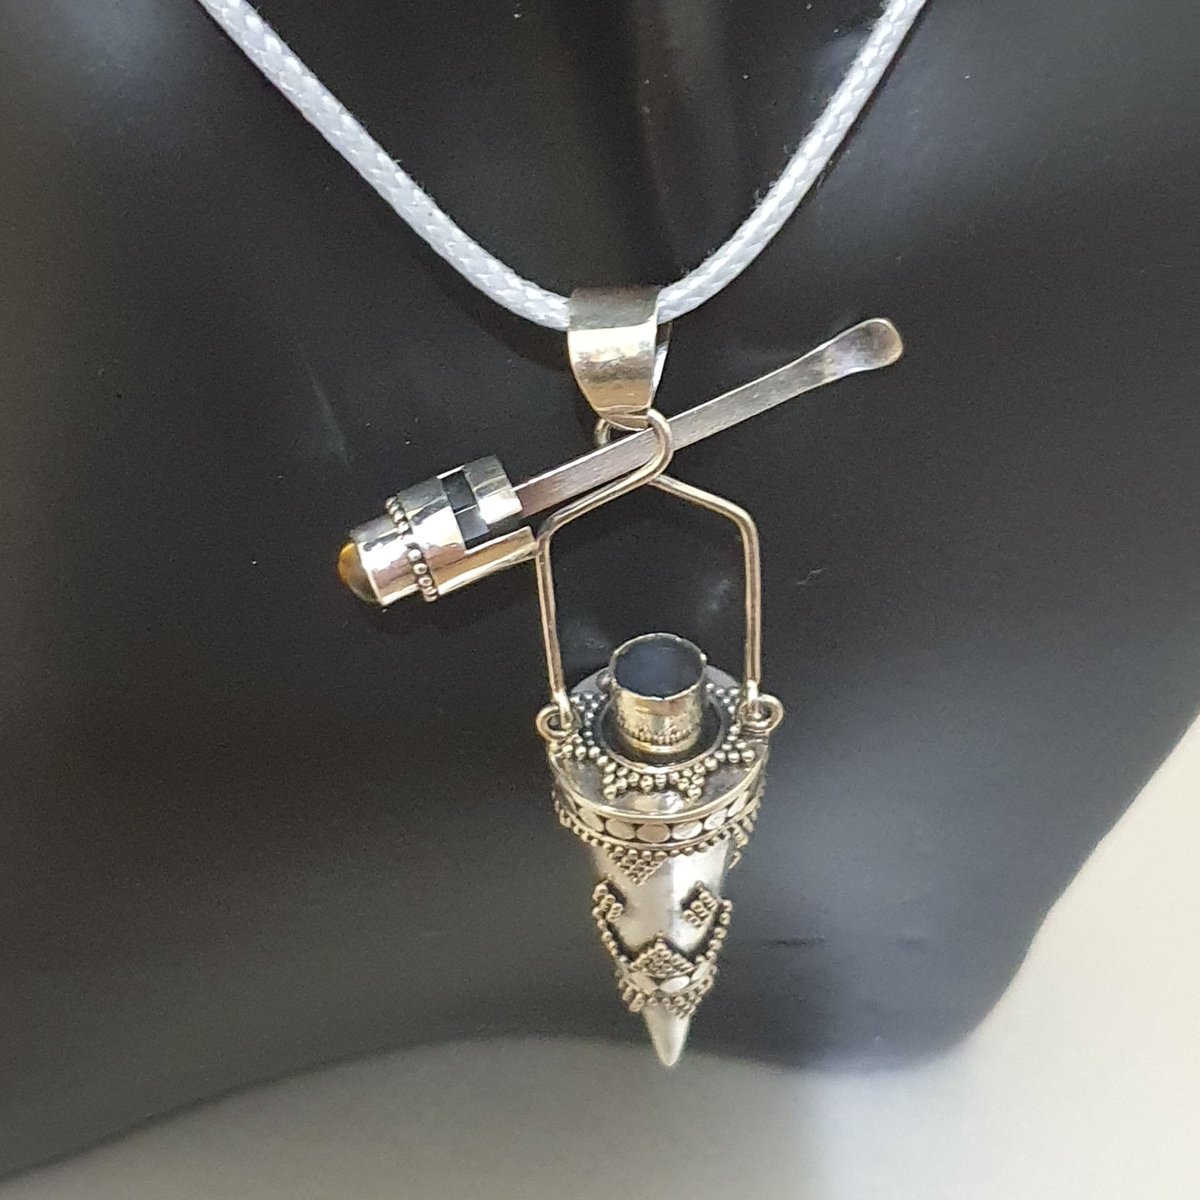 ✨Mystery solved! It's a spoon necklace... but wait, there's more! This vintage vial pendant is the perfect secret stash for your favorite things. #spoonjewelry #vintagetreasures #uniqネックレス #witchyvibes #magicalfinds 
Find it on our Etsy store!
dspringsilver.etsy.com/listing/163896…